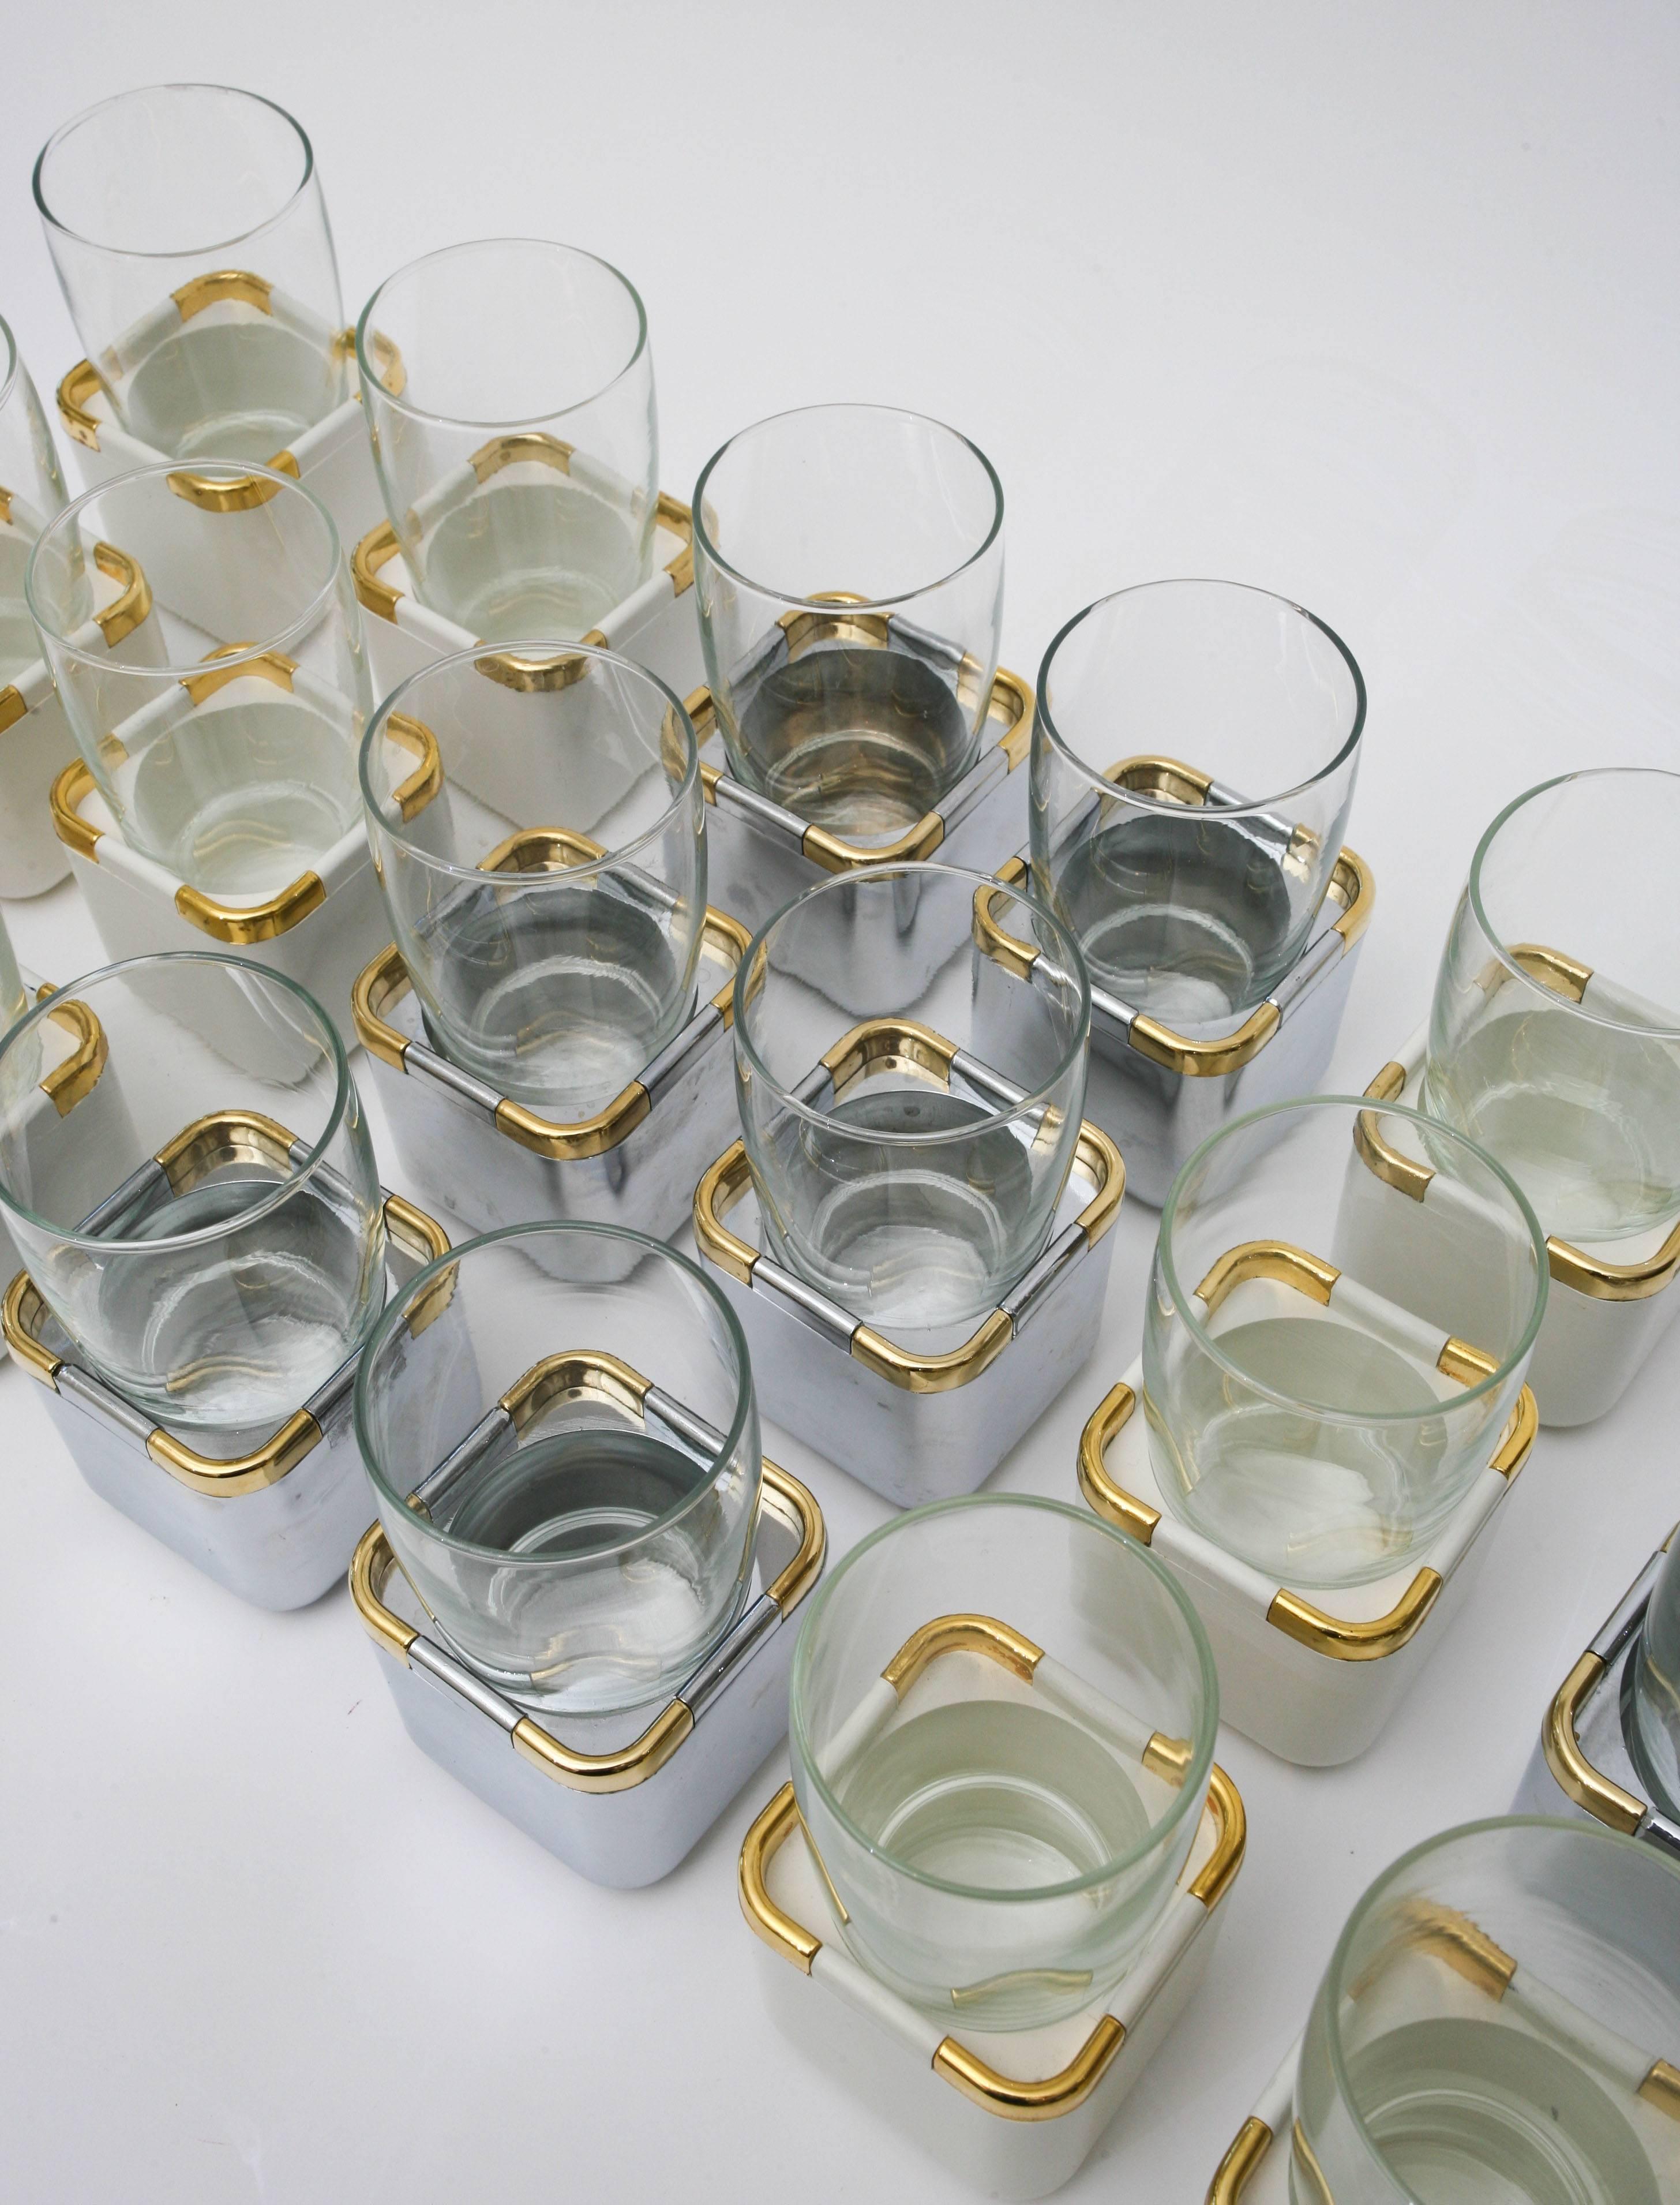 Modern Set of 16 Resin, Glass and Gold-Plated Garden Drinking Glasses Barware